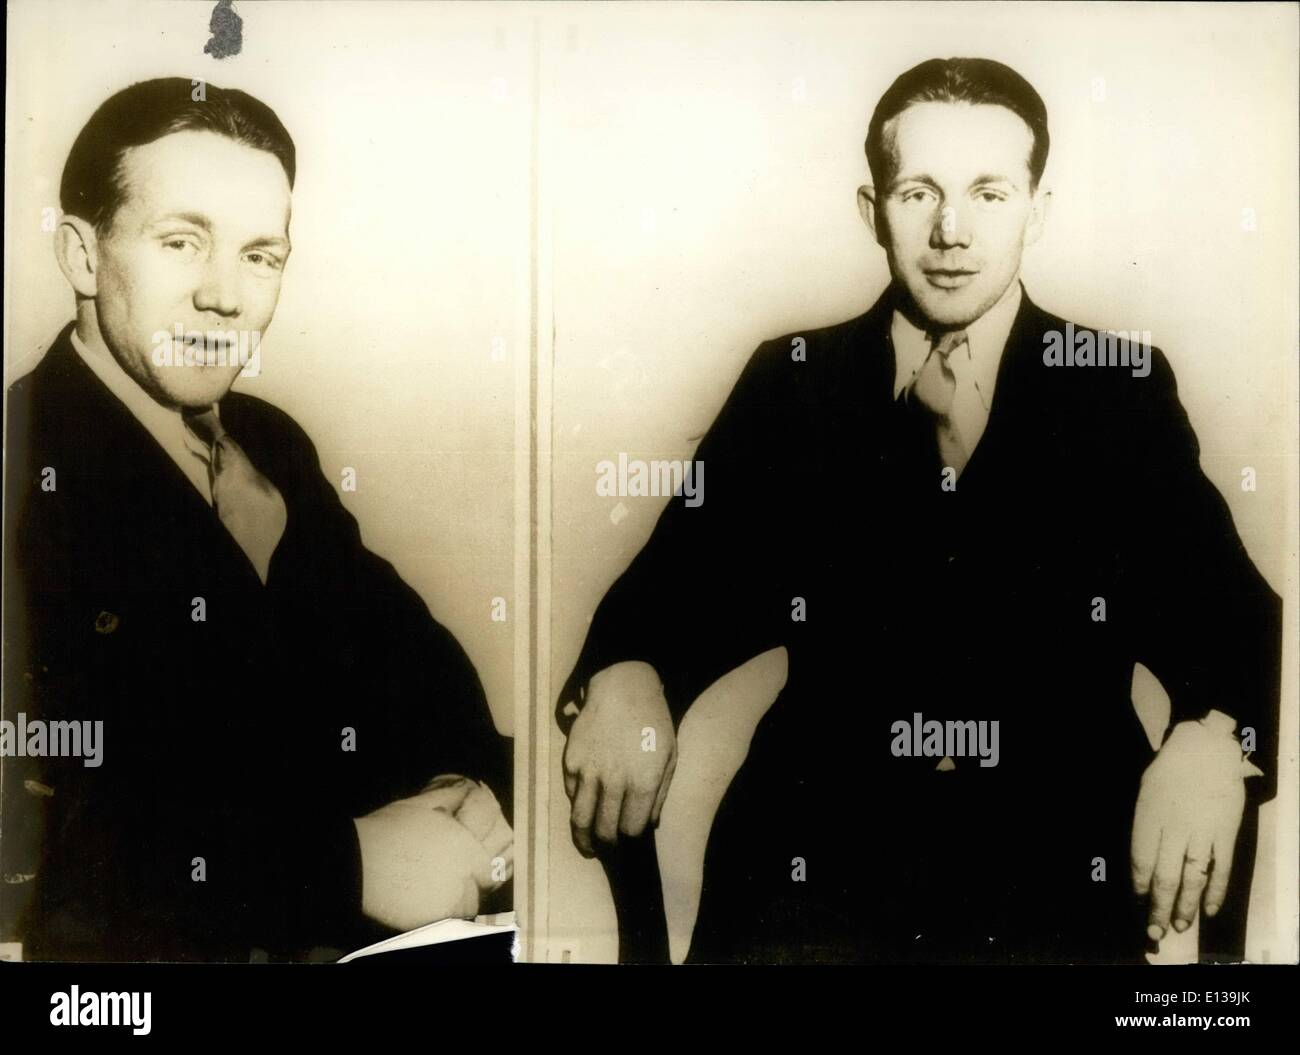 Feb. 29, 2012 - Former Sweetheart of Nurse Figure in Hauptmann case fleminston., N.U..... Henry ''Red'' Johnson, Norbegian Sailor, one-time sweat-heart of Nurse Betty Gov, or the Lindbergh Household. Johnson, shortly after the Kidnapping of the Lindbergh Baby was held as a suspect of the crime, and was deported to Norway, After being Detained four and a half months. (Note to Editors-- this comeo is being sent ou for future use-- Johnson may figure Largely in future Testimony at the Hauptmann trail, and may come to the united States to appear as a witriese. Stock Photo